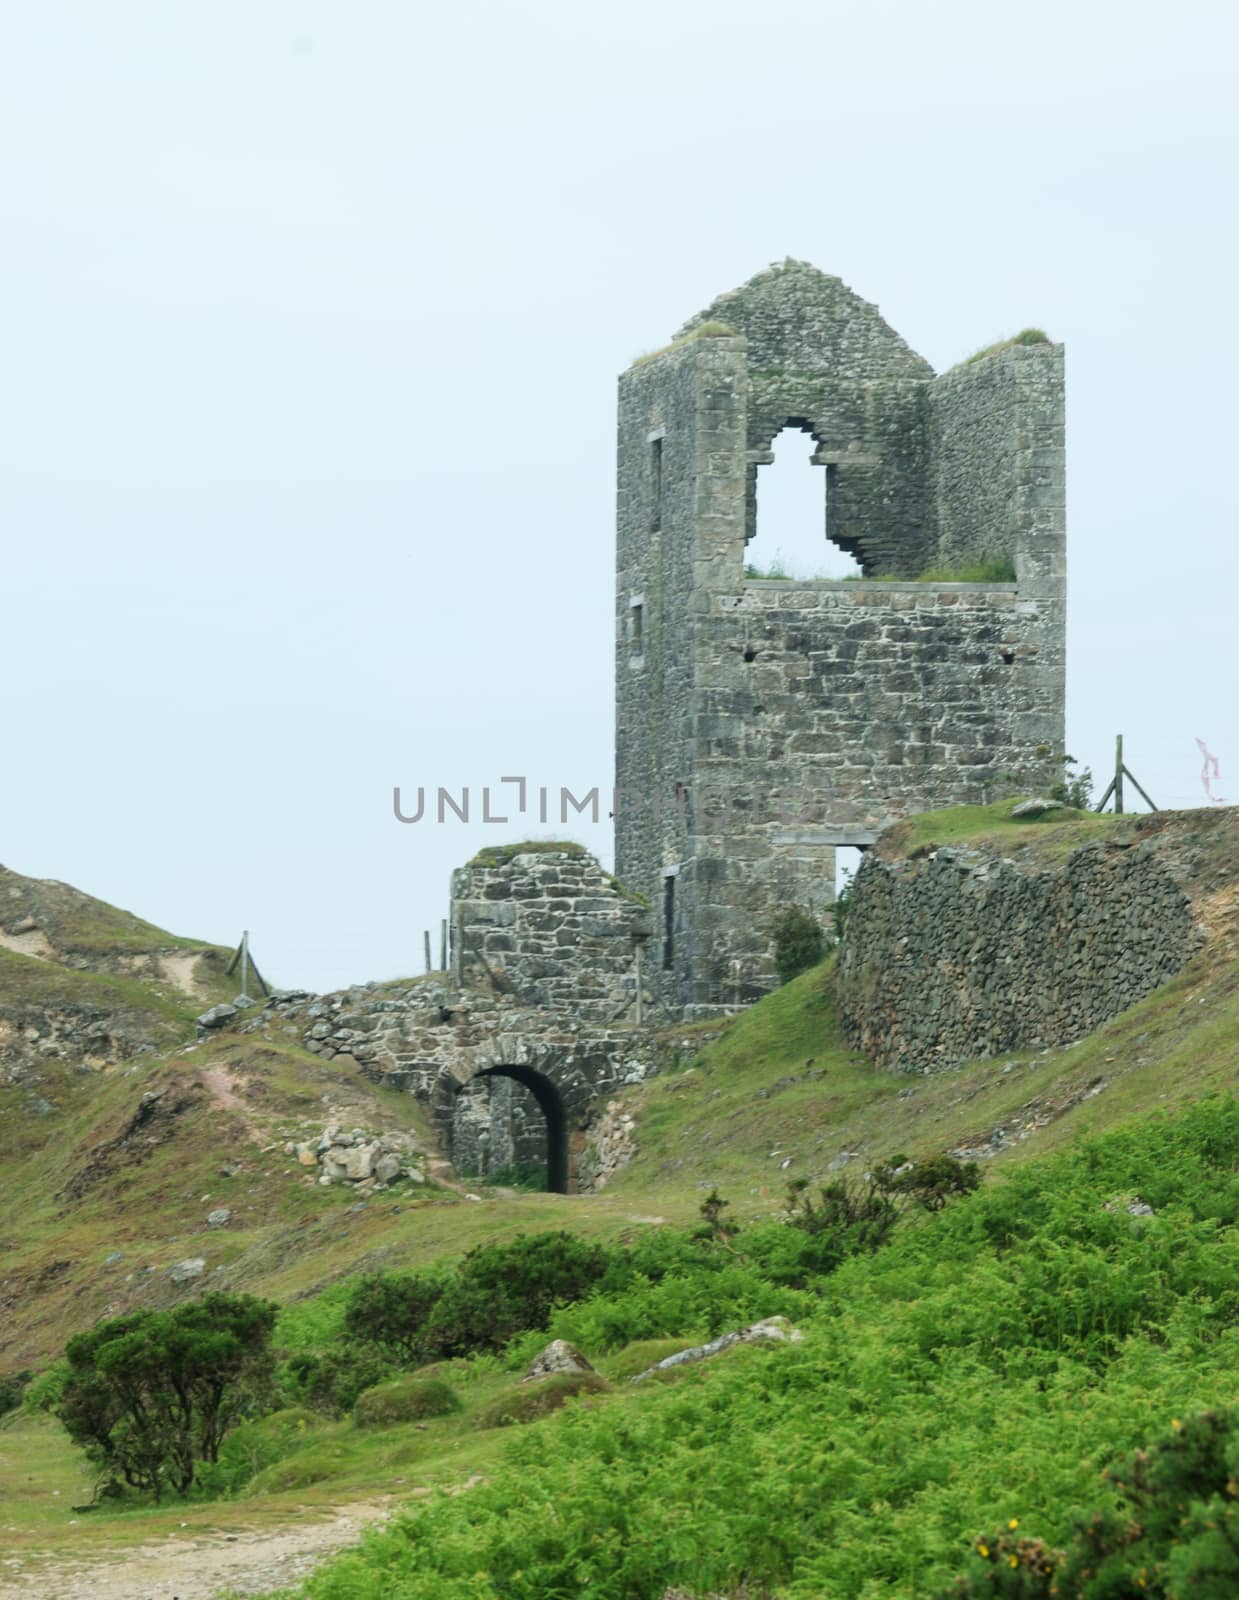 Images of old and non operating mines and their buildings on Caradon.